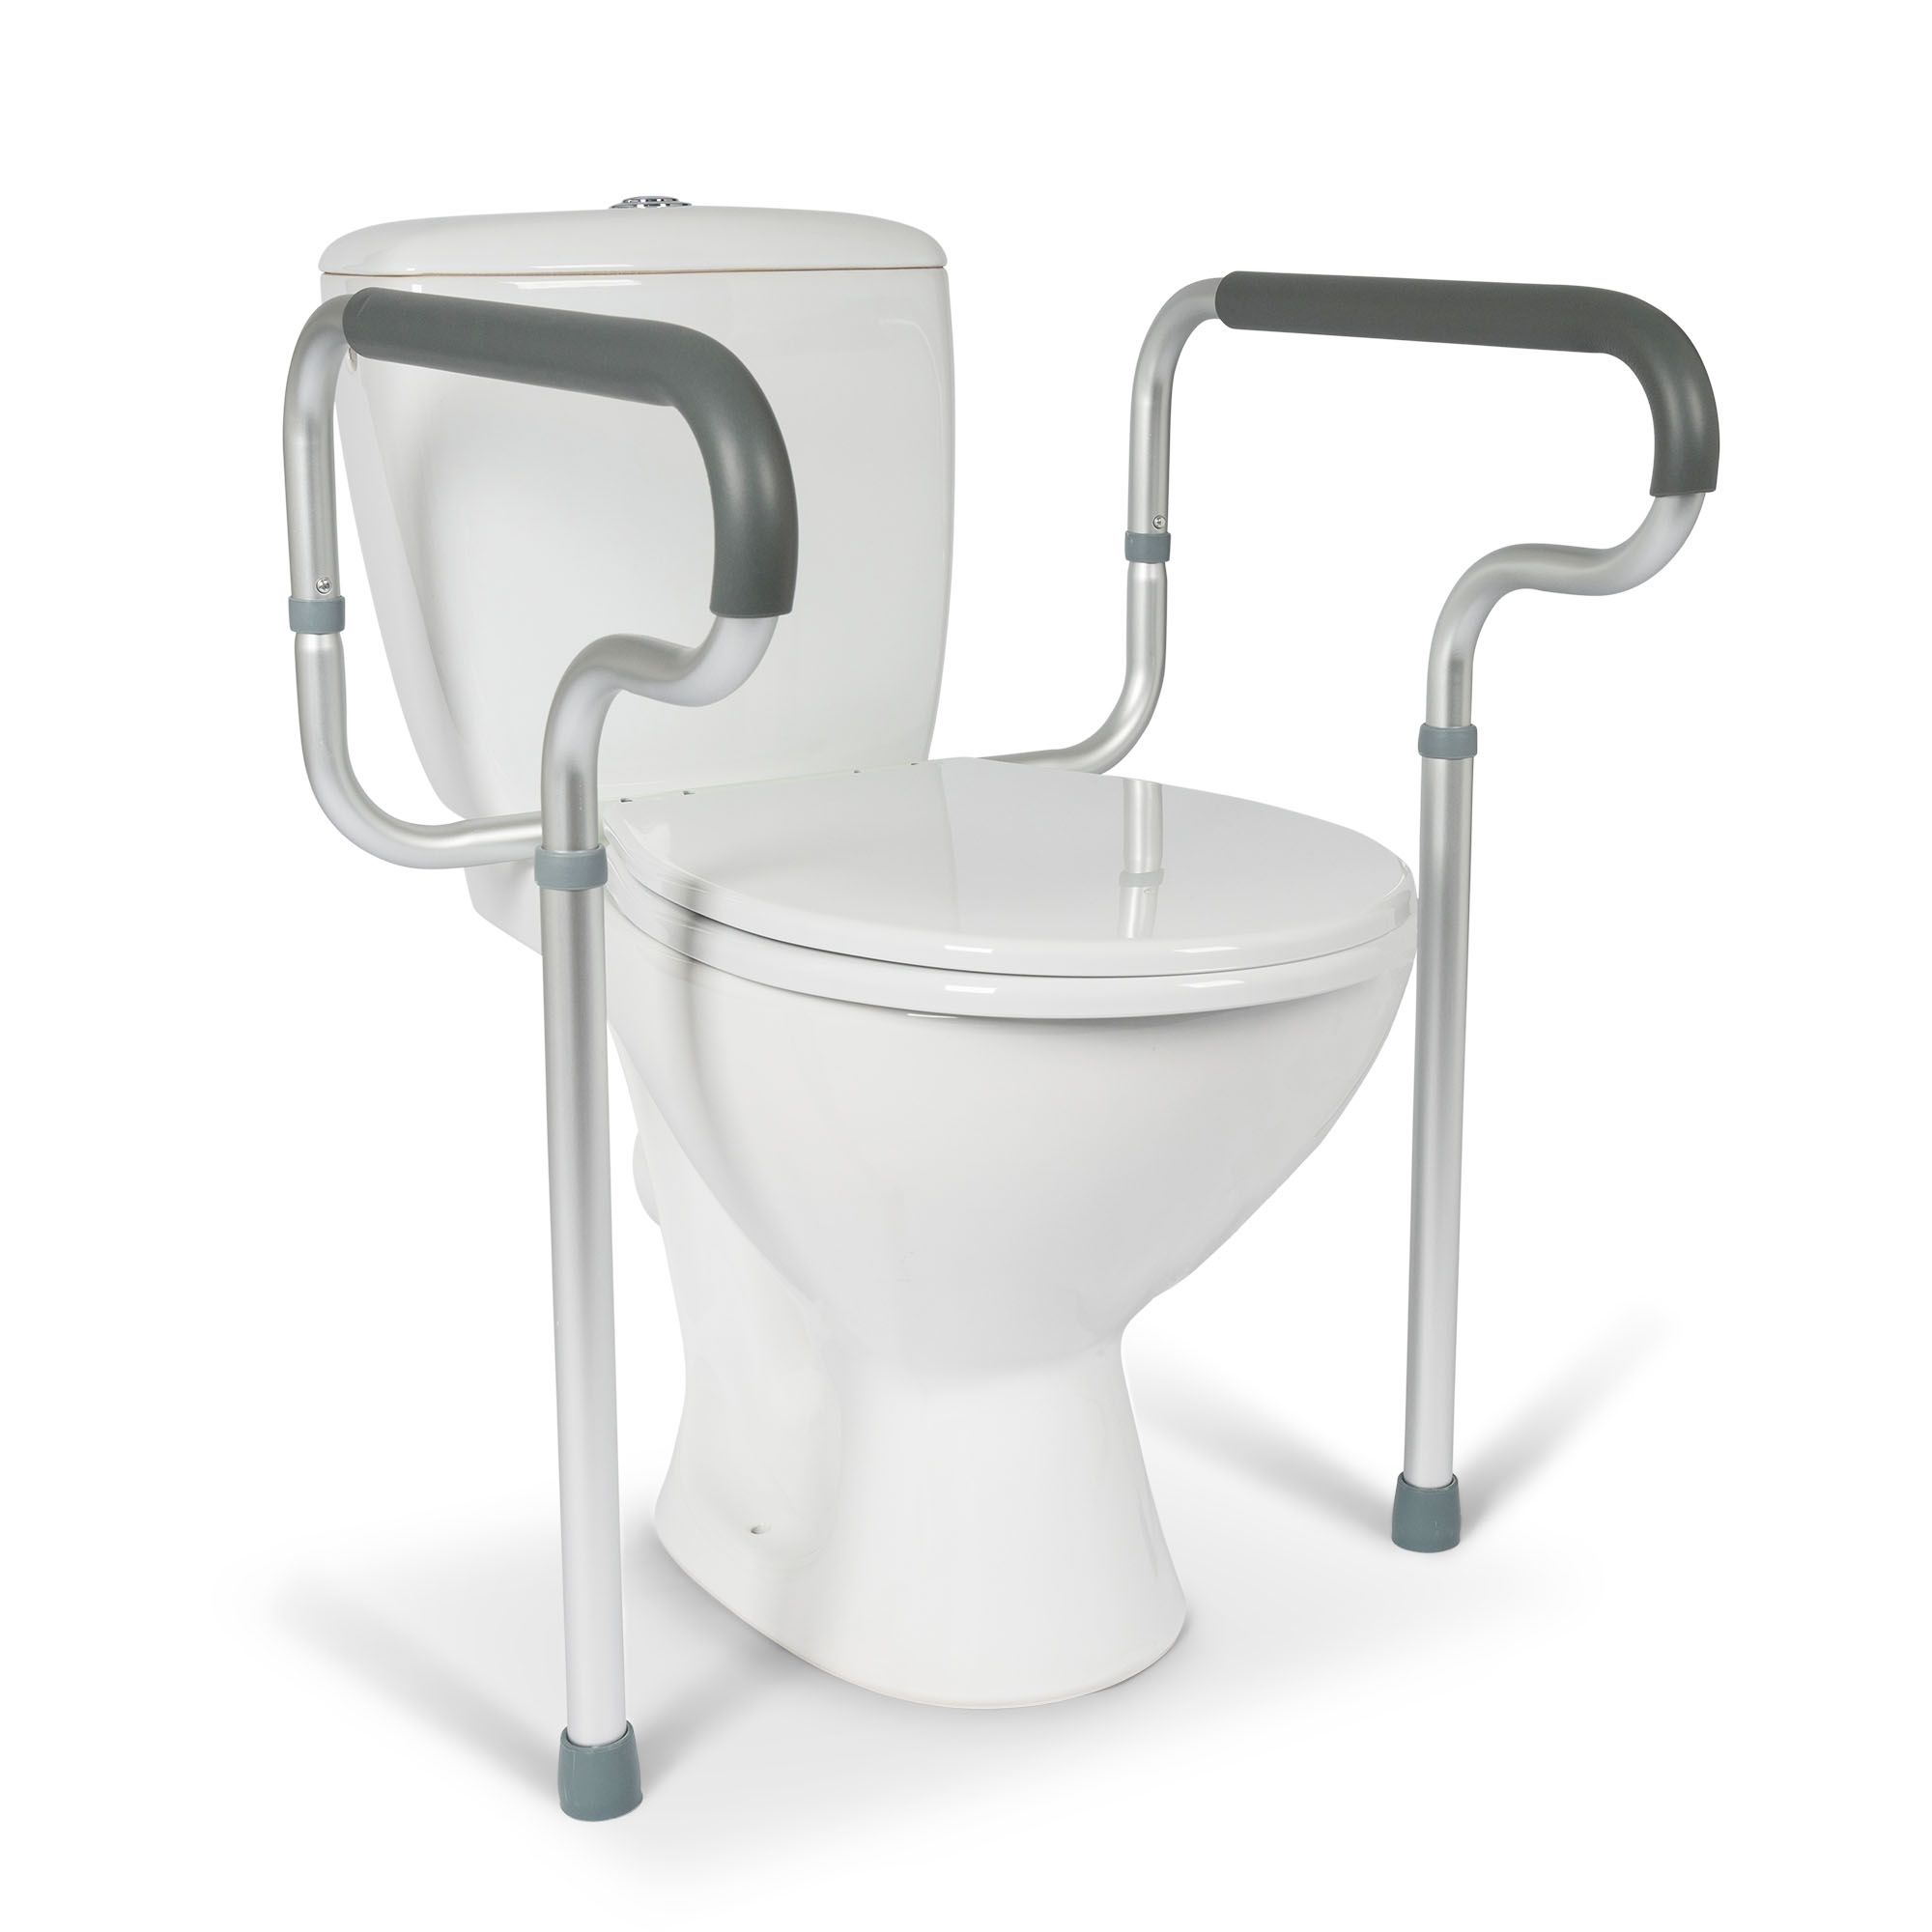 dunimed toilet frame front view